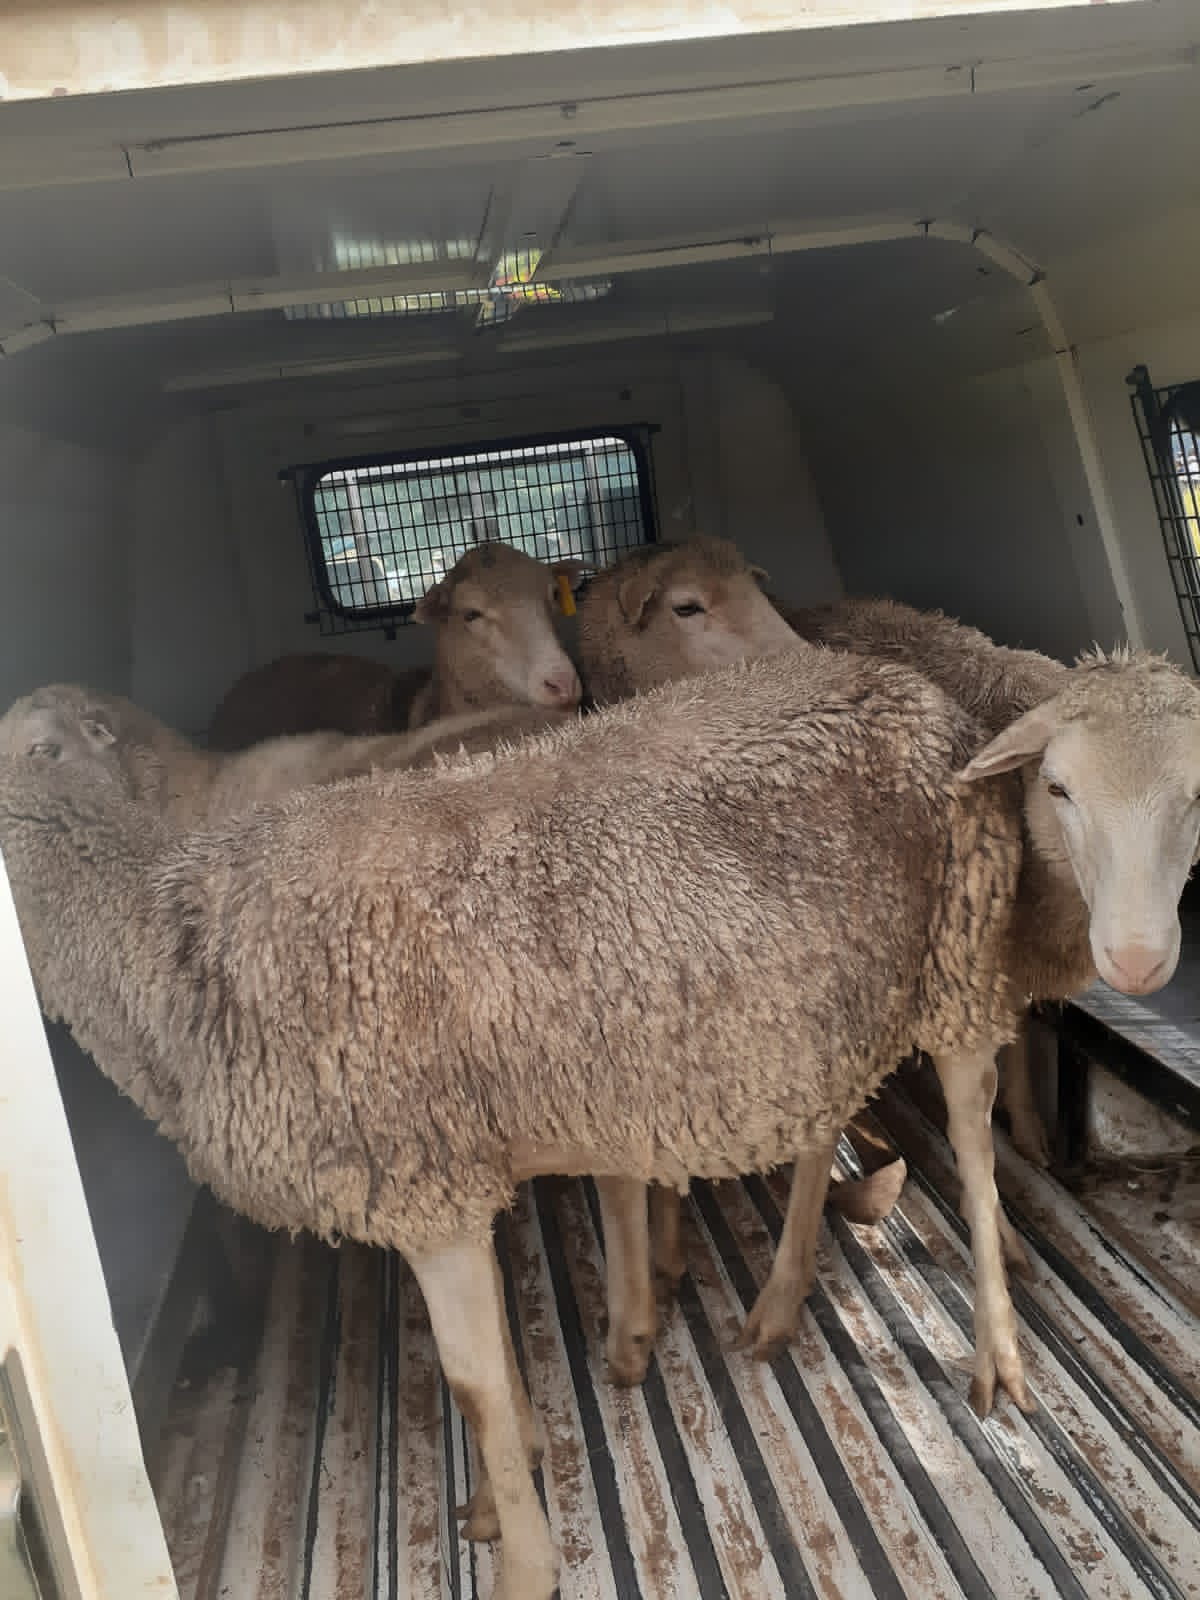 Stolen livestock recovered in successful joint operation